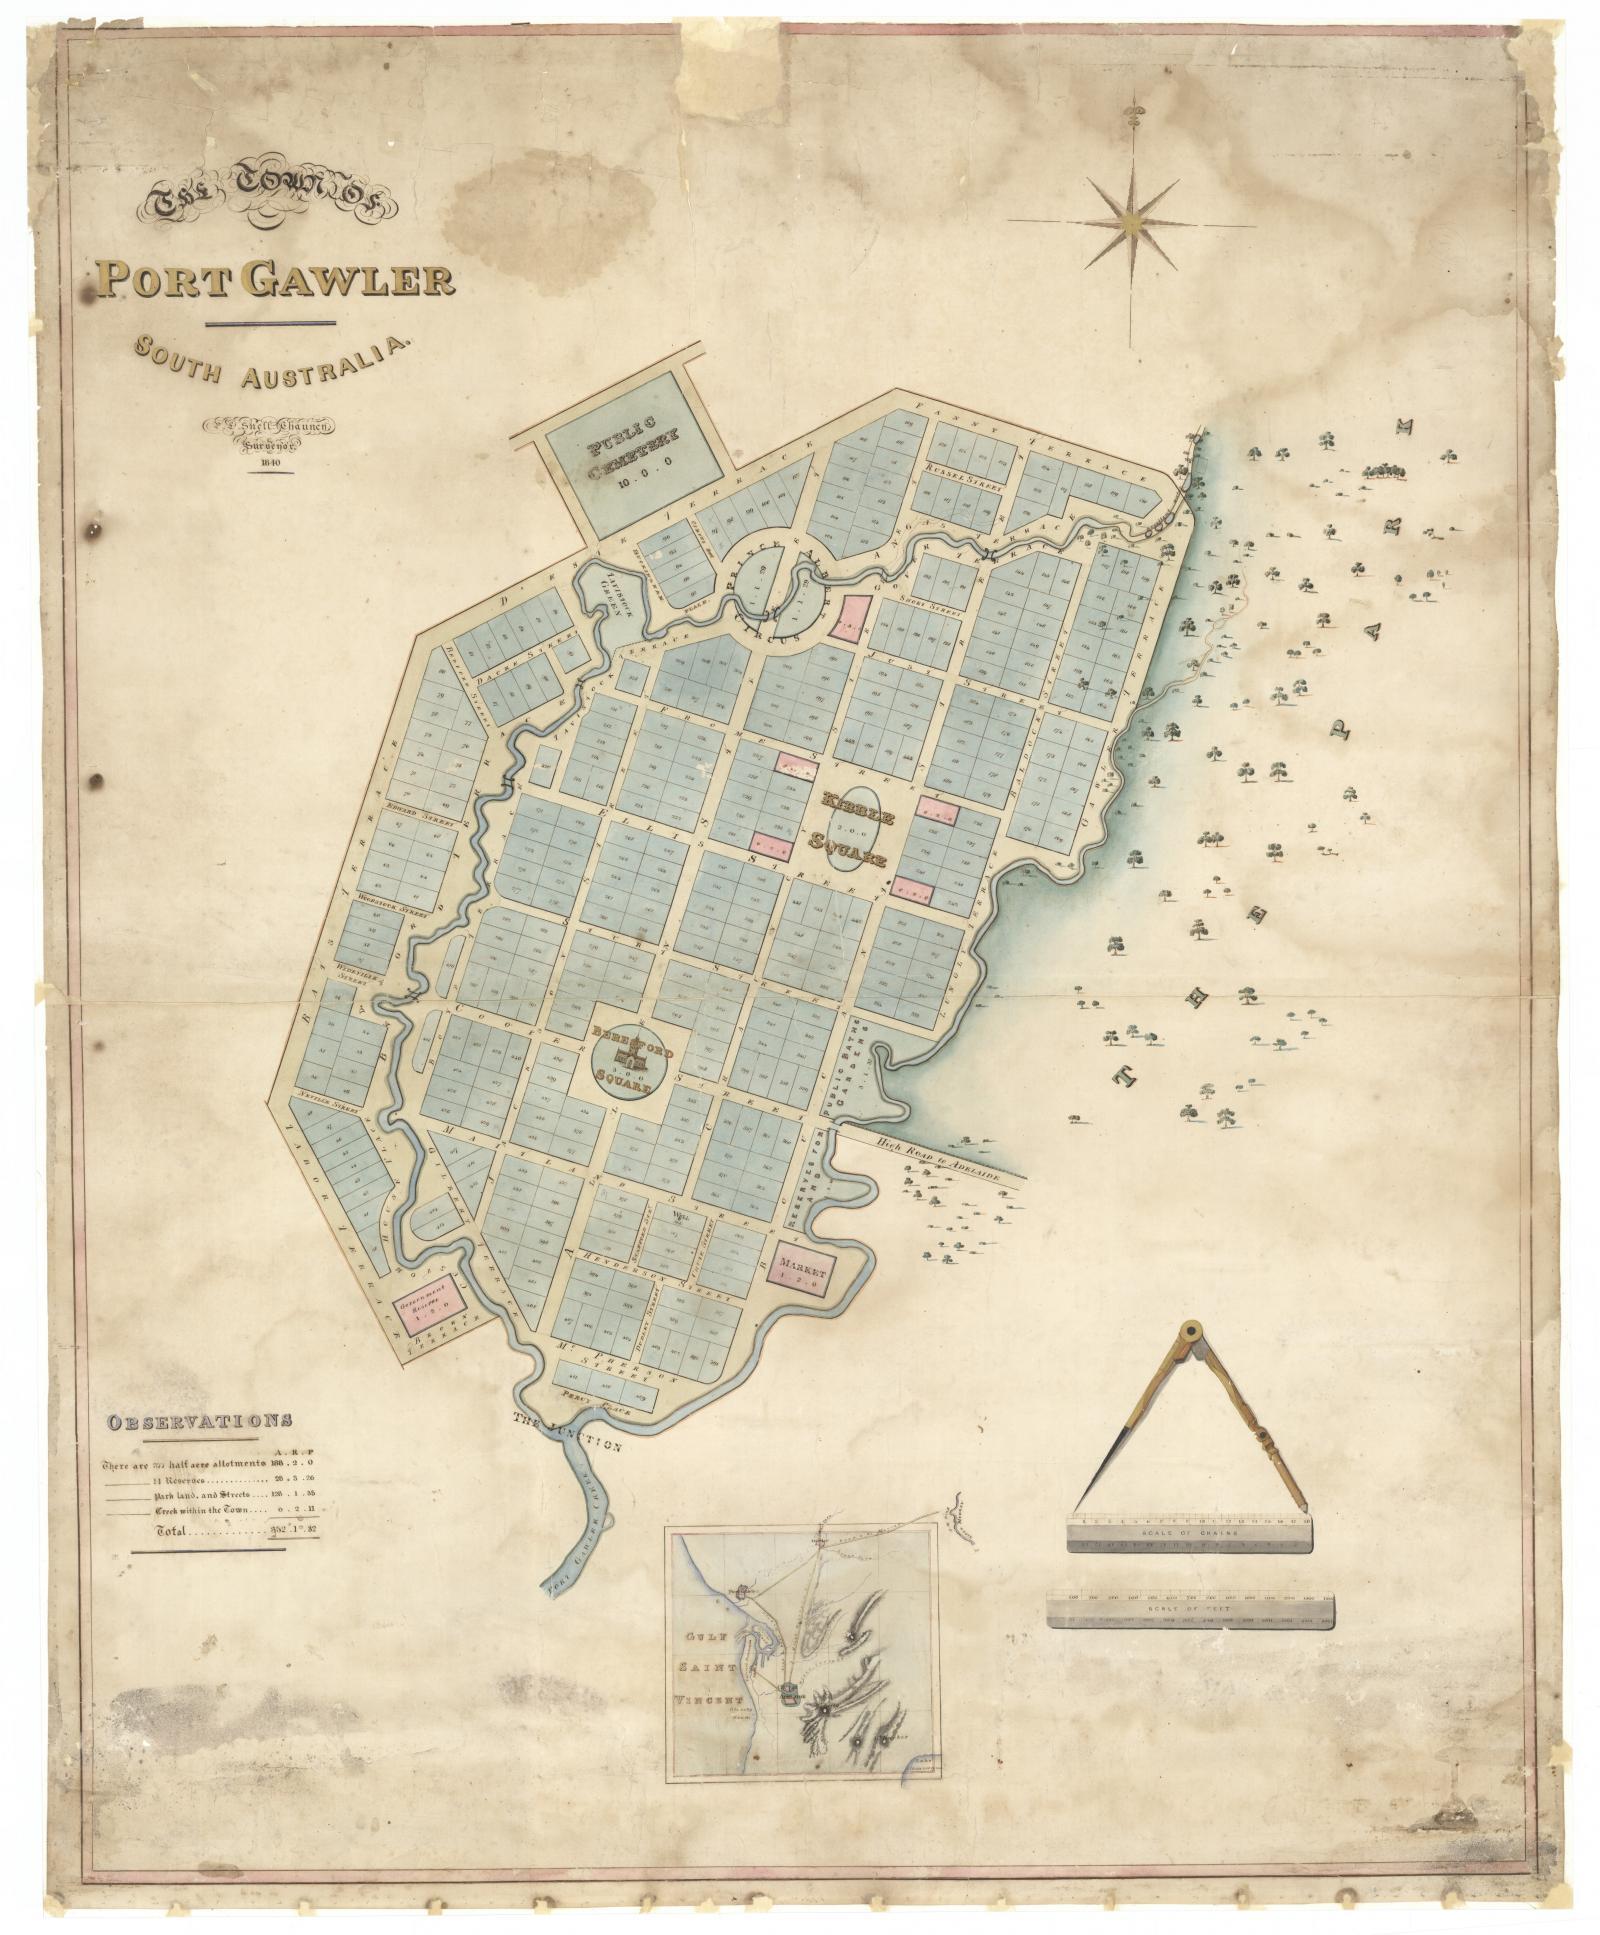 Map of The Town of Port Gawler 1840 SLSA C 1181